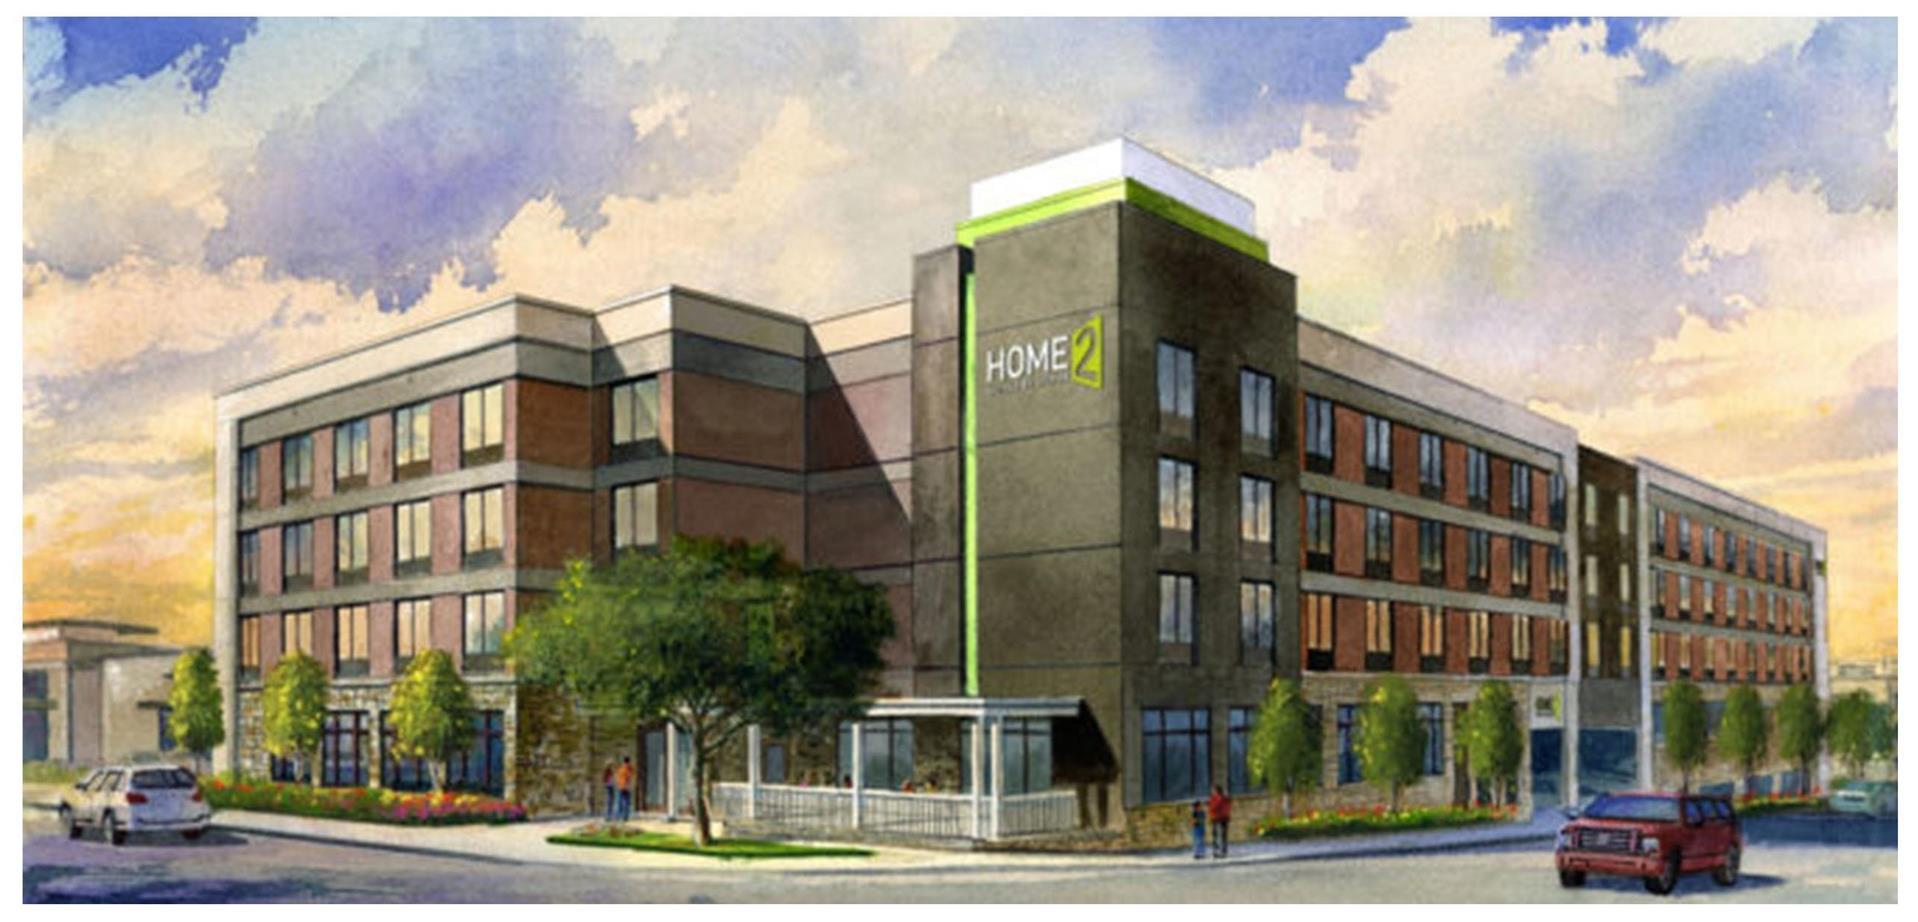 Home2 Suites by Hilton Fort Worth Cultural District in Fort Worth, TX